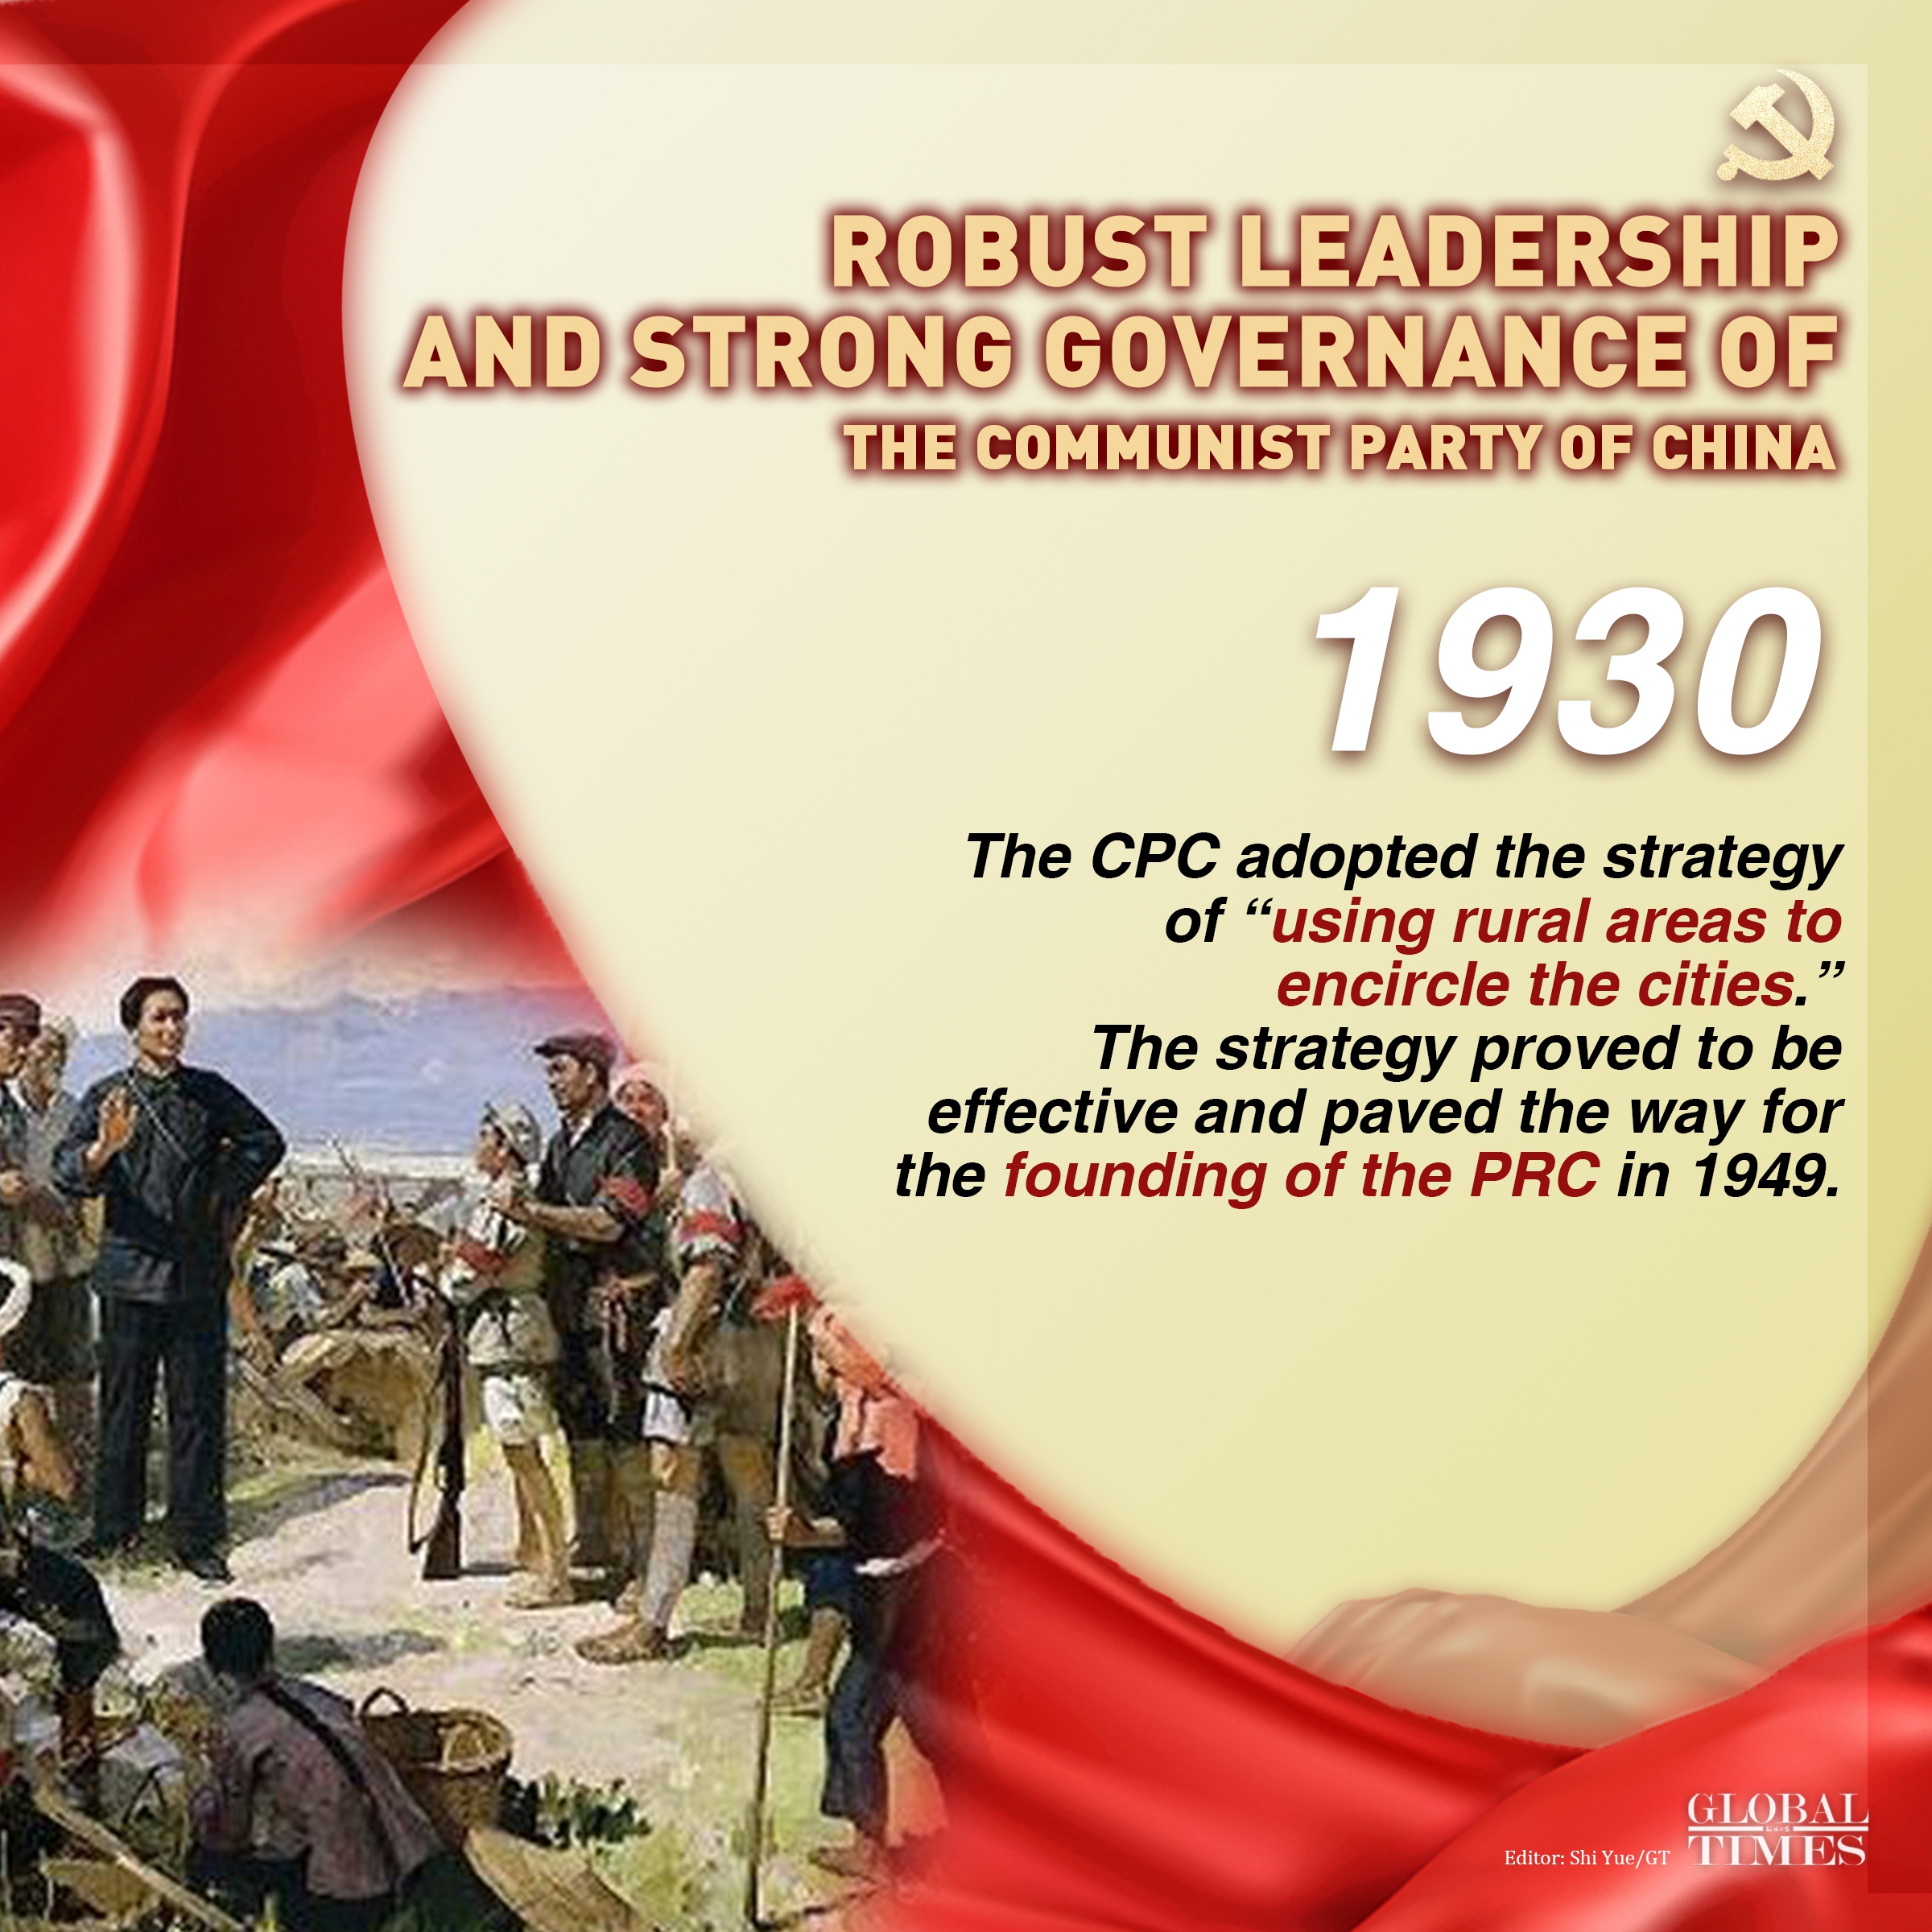 The CPC adopted the strategy of “using rural areas to encircle the cities.” The strategy proved to be effective and paved the way for the founding of the PRC in 1949. Graphic: Xu Zihe/GT